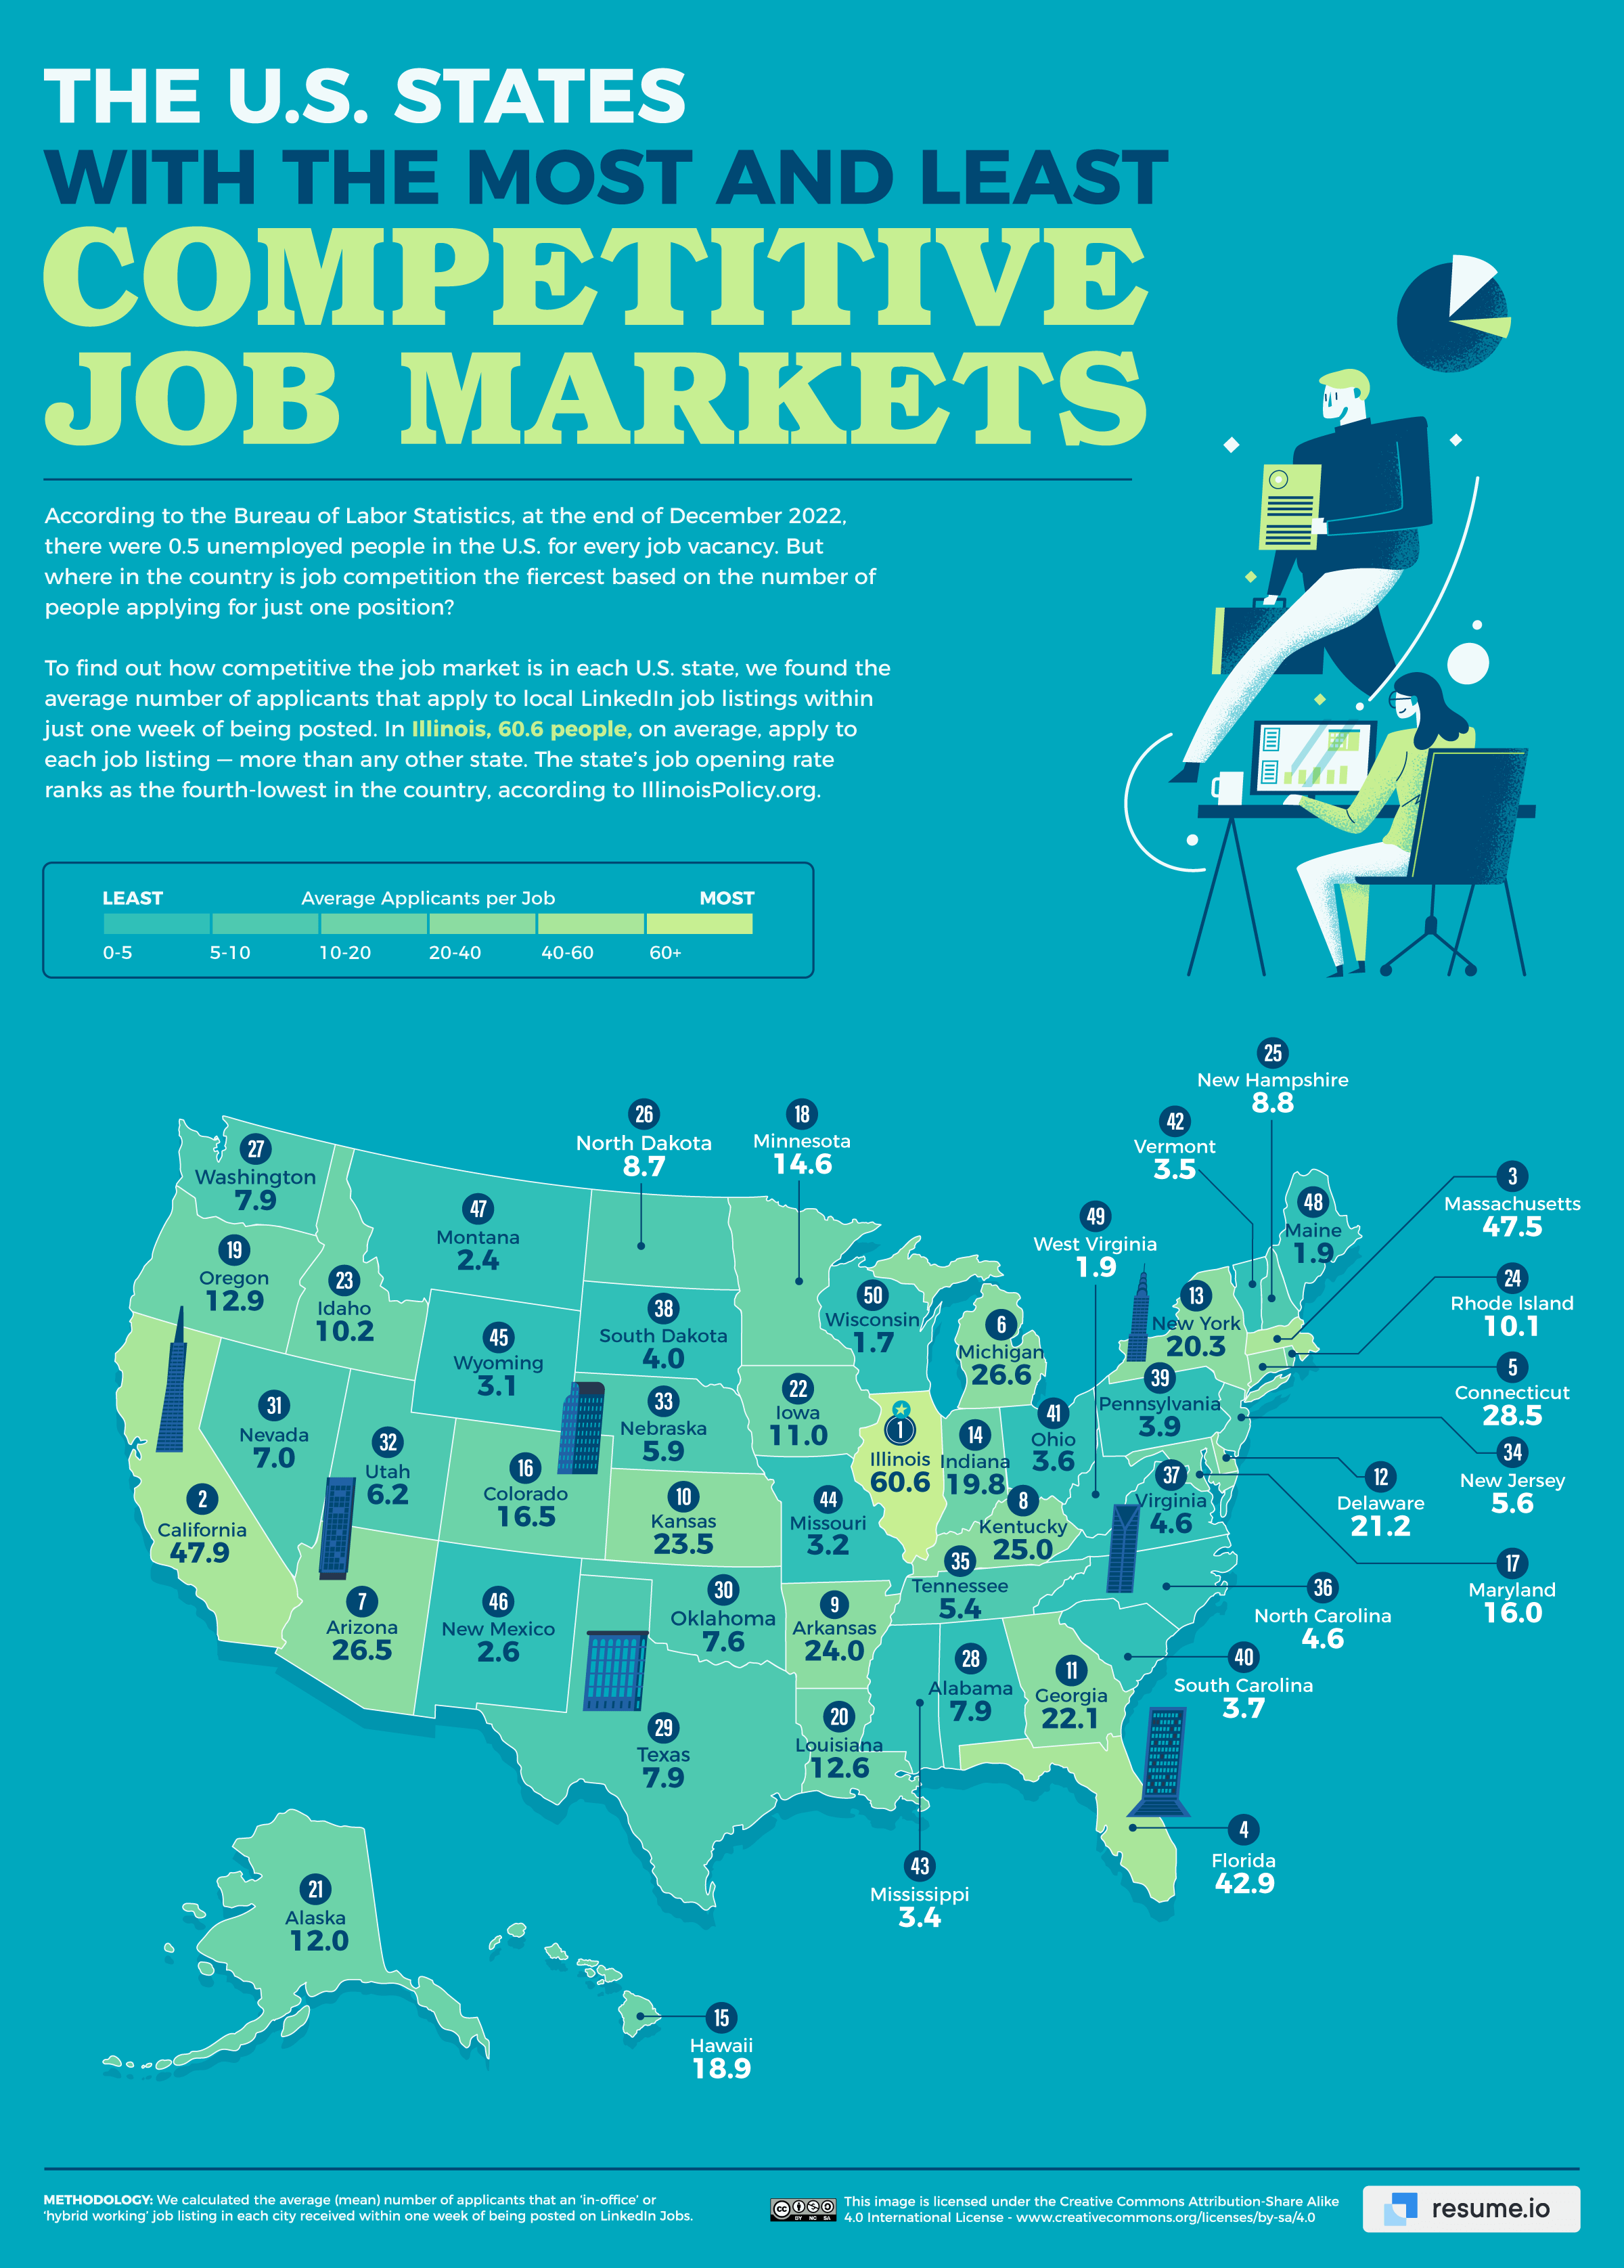 the least and most competitive job markets in the US per state